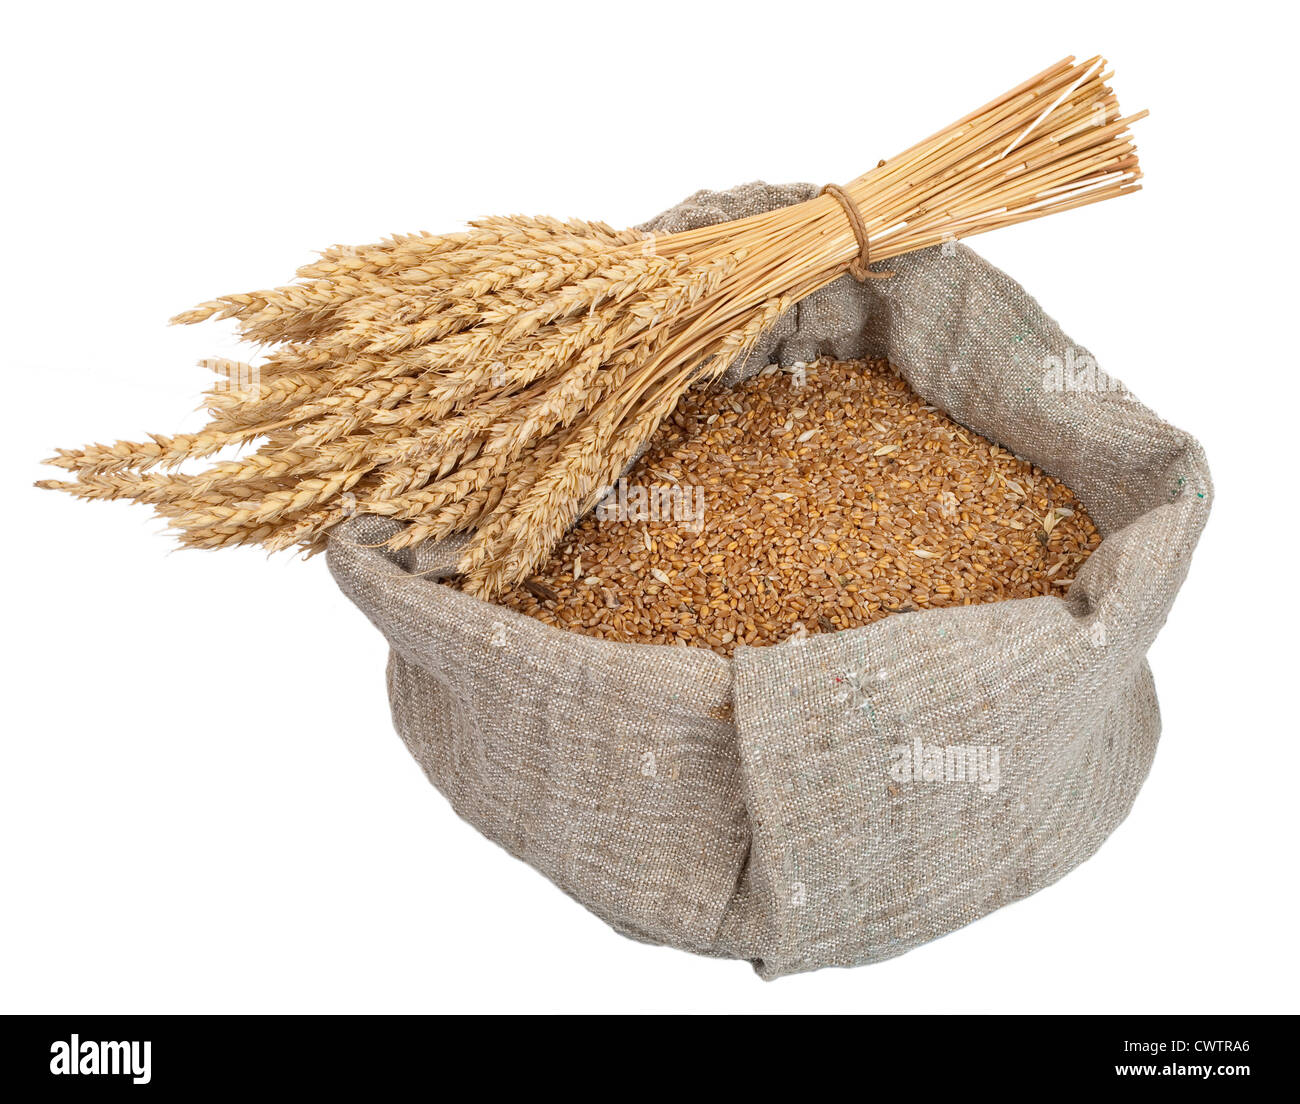 Bag with wheat grain and ears of wheat Stock Photo - Alamy